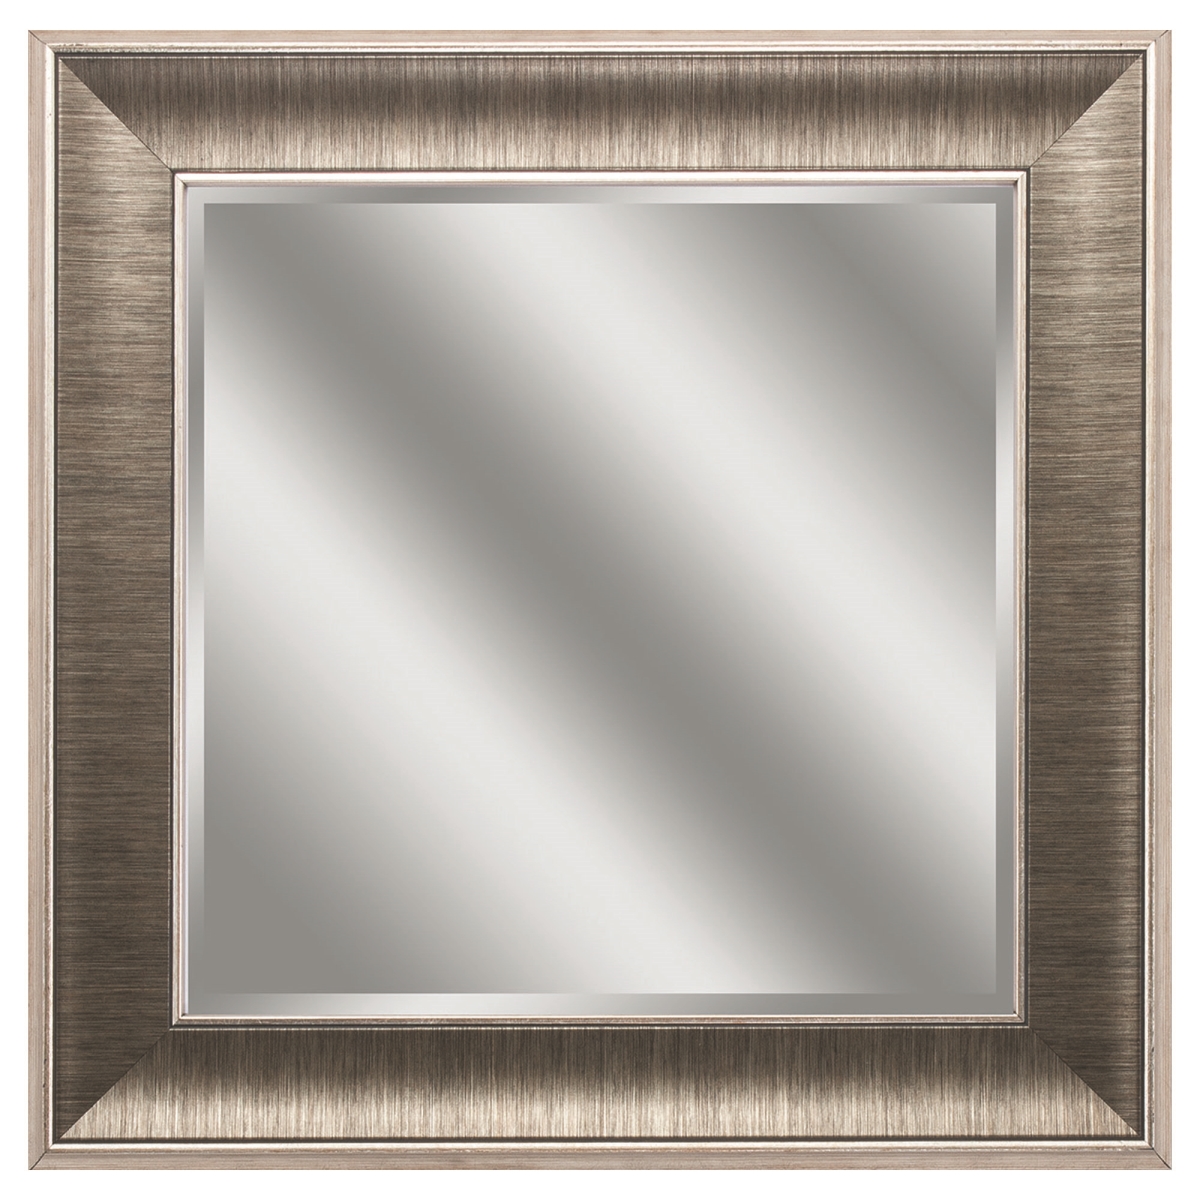 Picture of Propac Images 9940 Beveled Mirror - Gunmetal Gray Frame